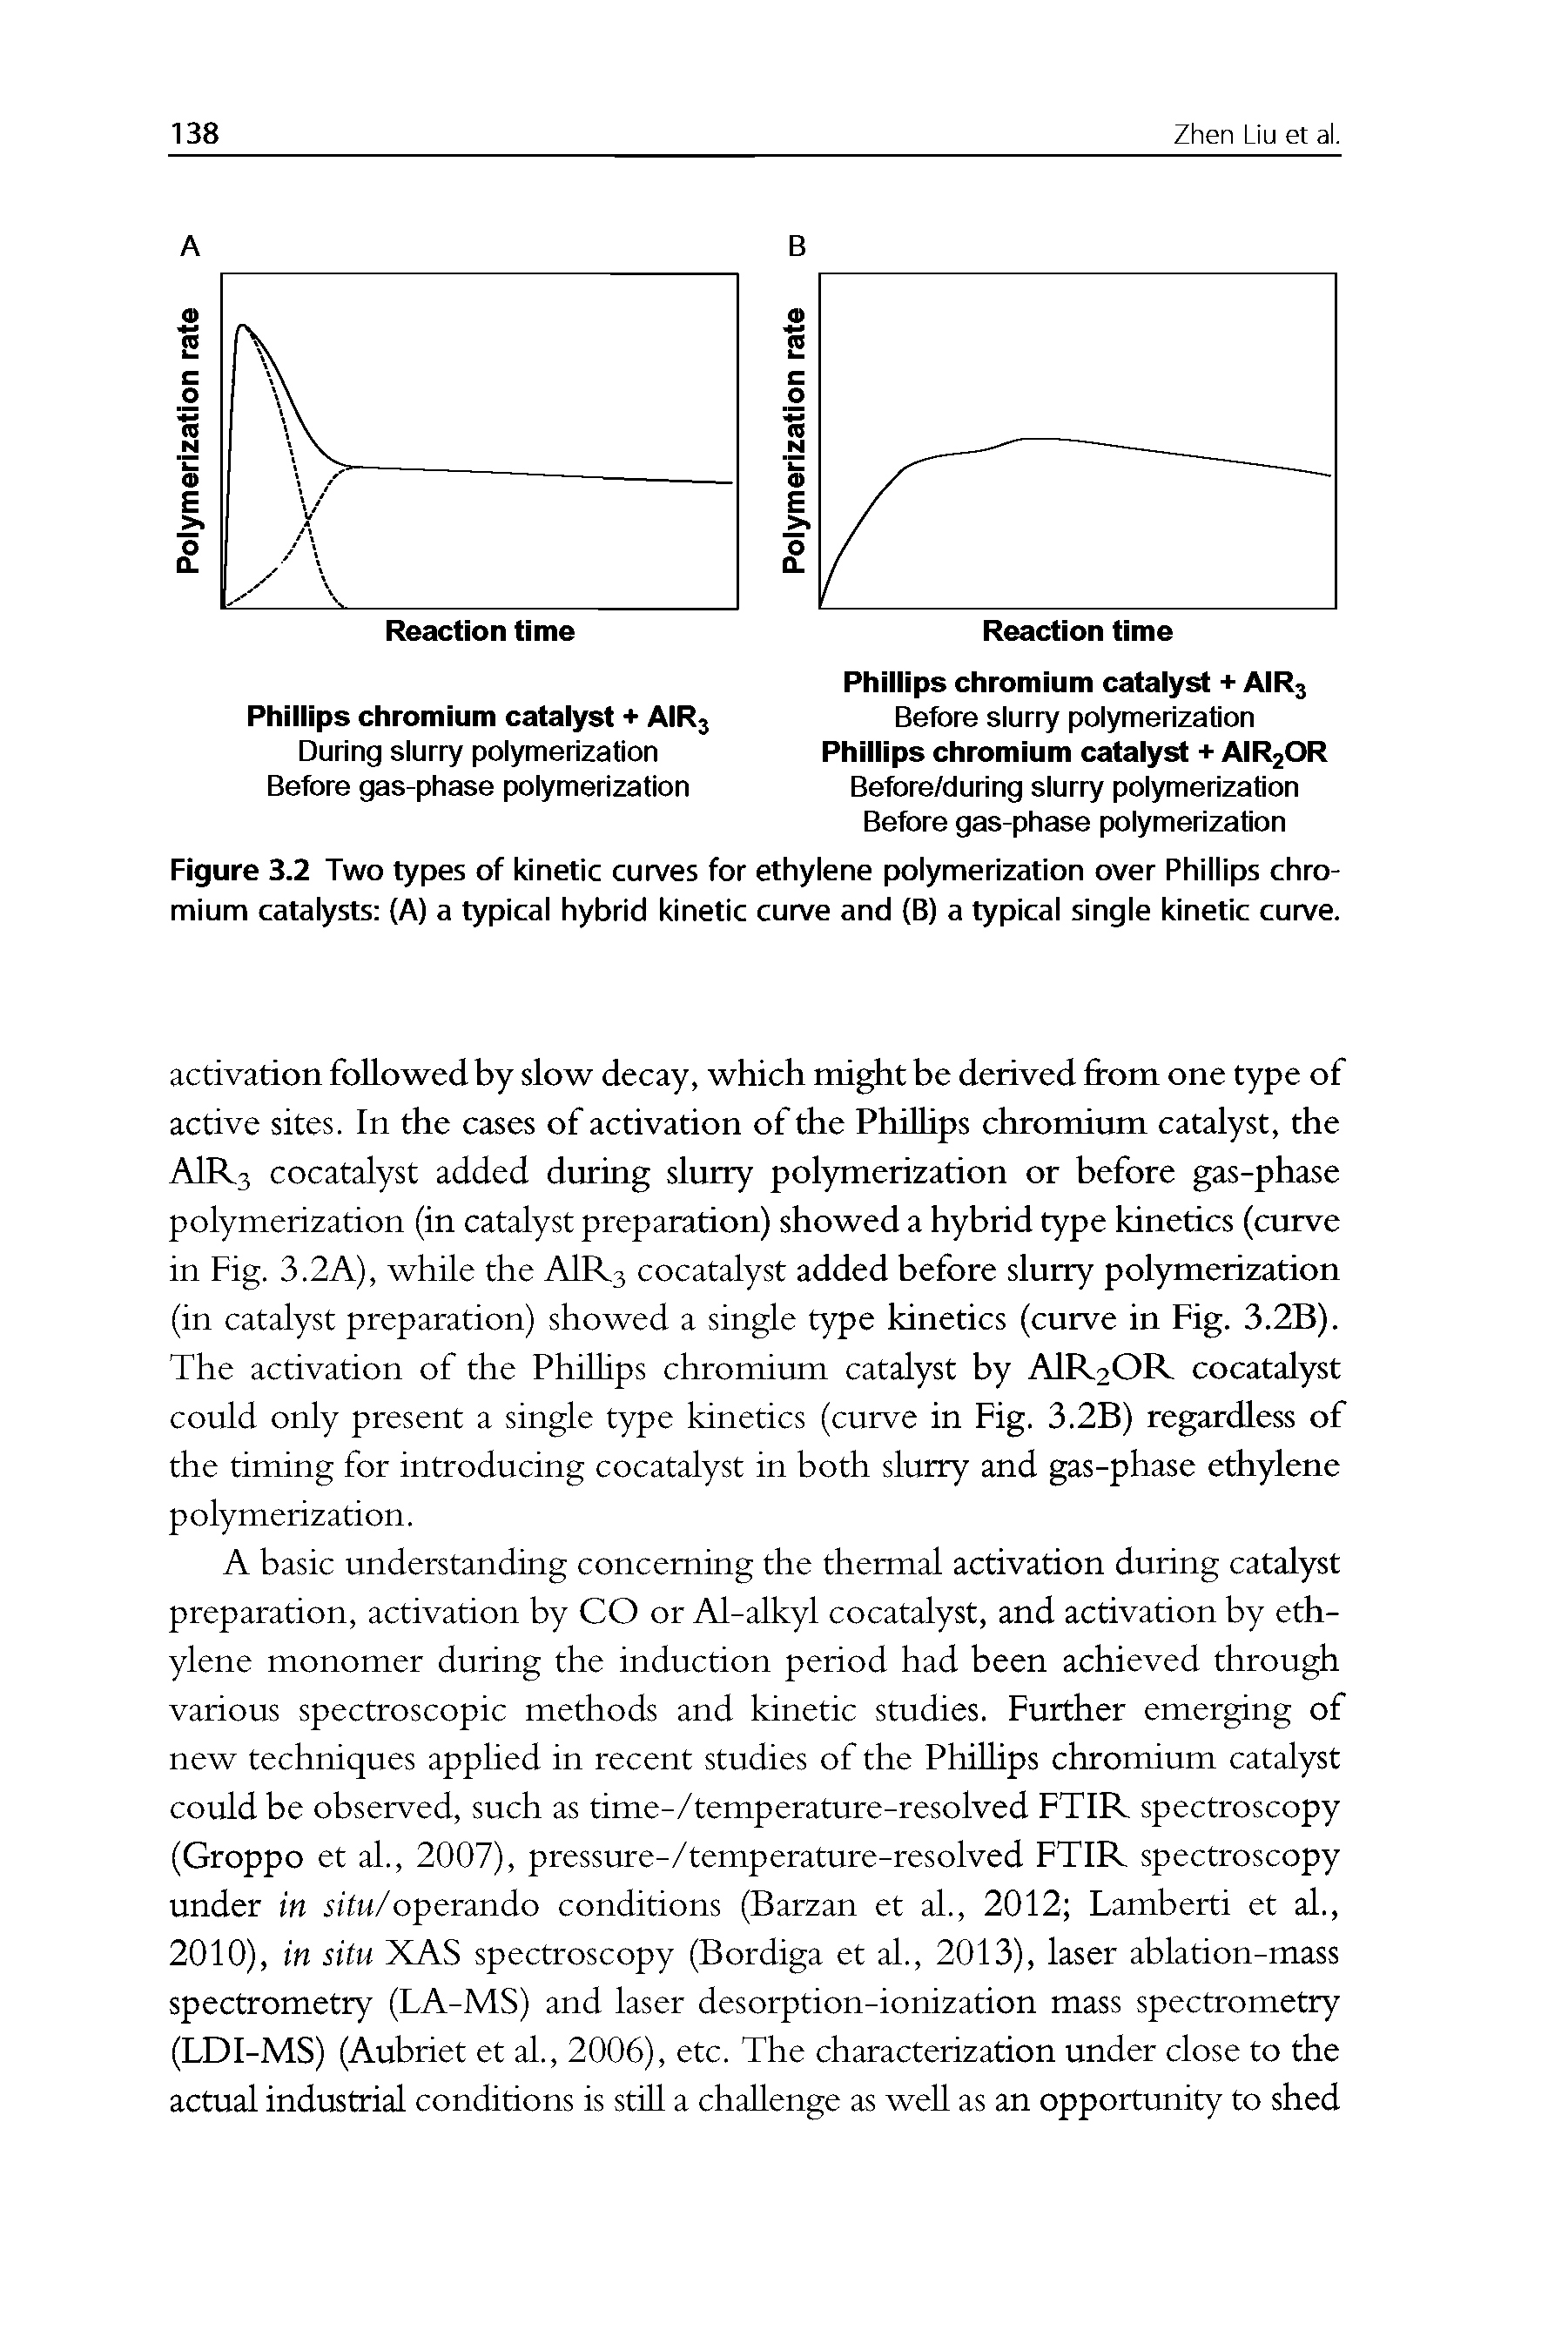 Figure 3.2 Two types of kinetic curves for ethylene polymerization over Phillips chromium catalysts (A) a typical hybrid kinetic curve and (B) a typical single kinetic curve.